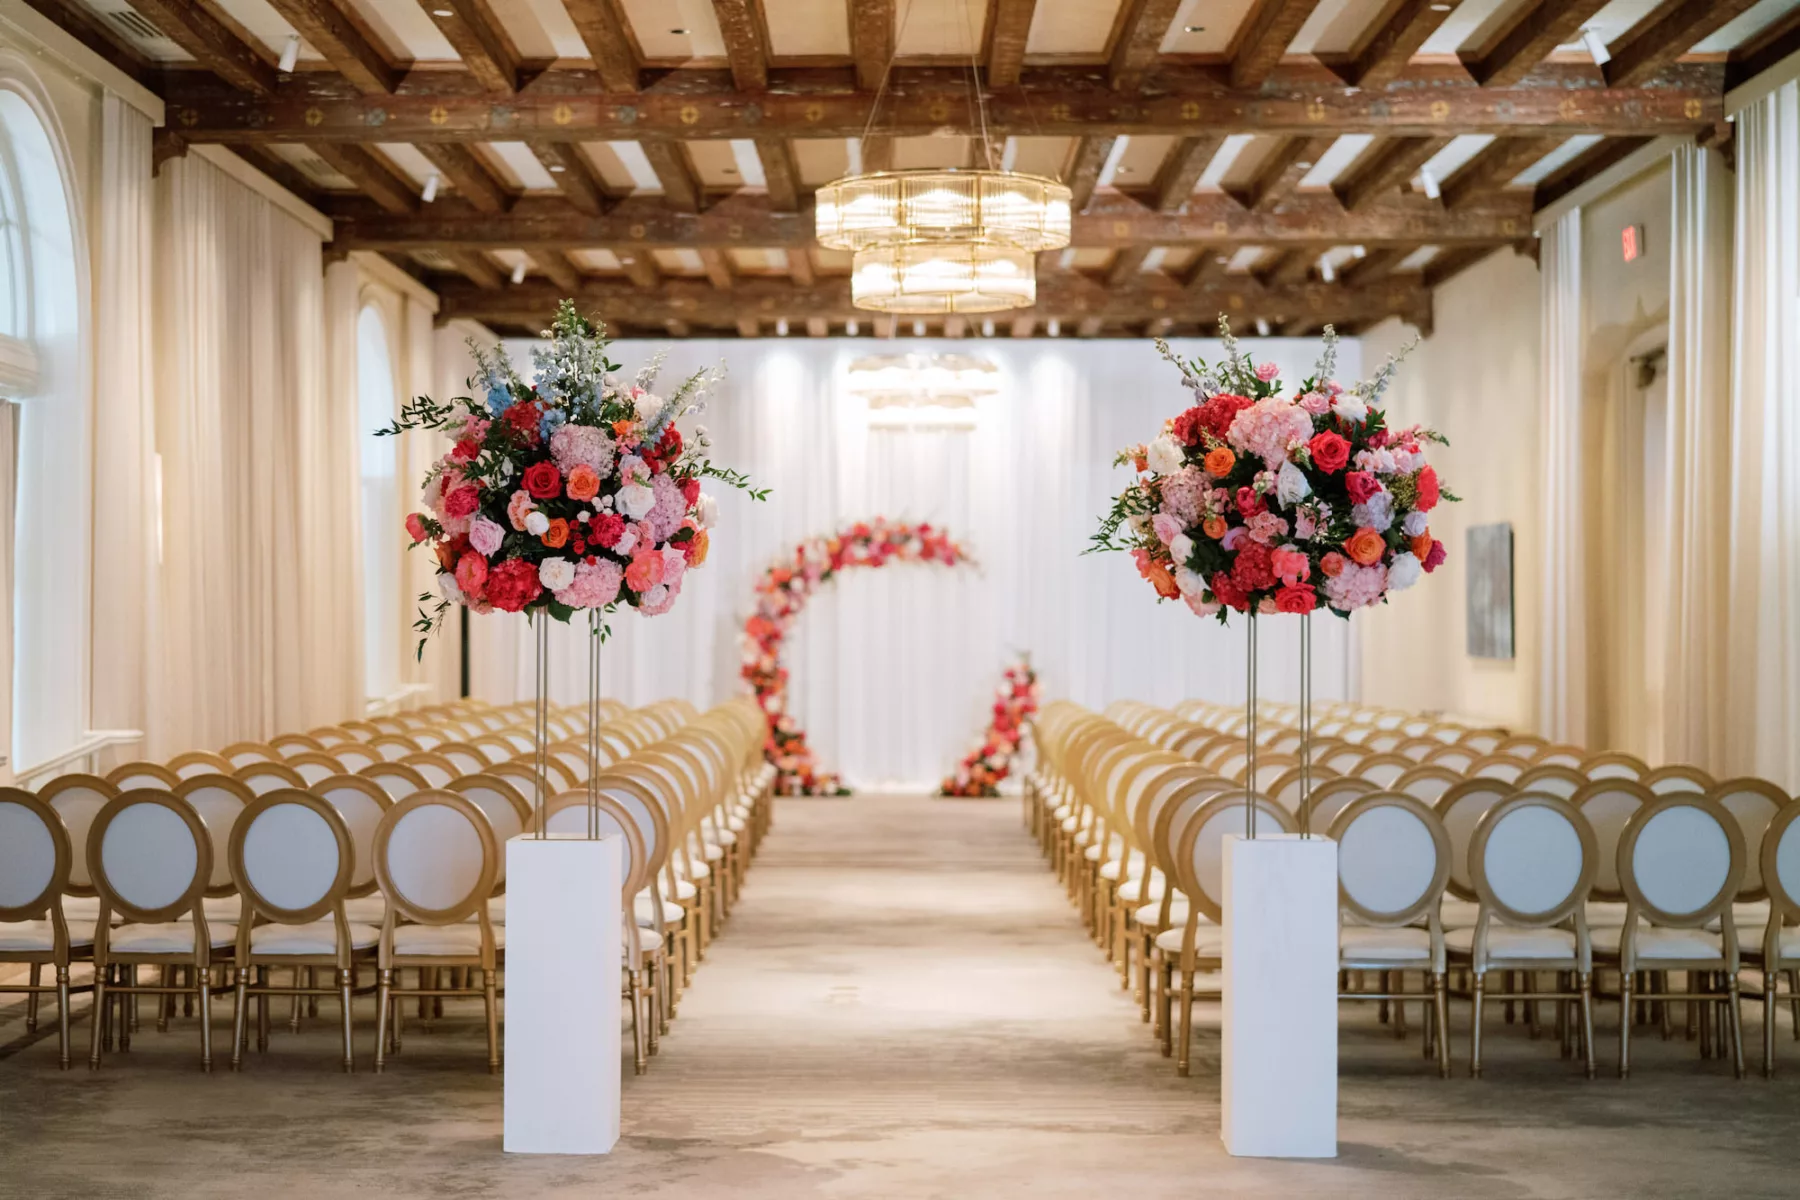 Luxurious Pink and Blue Summer Ballroom Wedding Ceremony with White Draping | Tampa Bay Planner Parties A La Carte | Florist Bruce Wayne Florals | Kate Ryan Event Rentals | Venue The Vinoy 